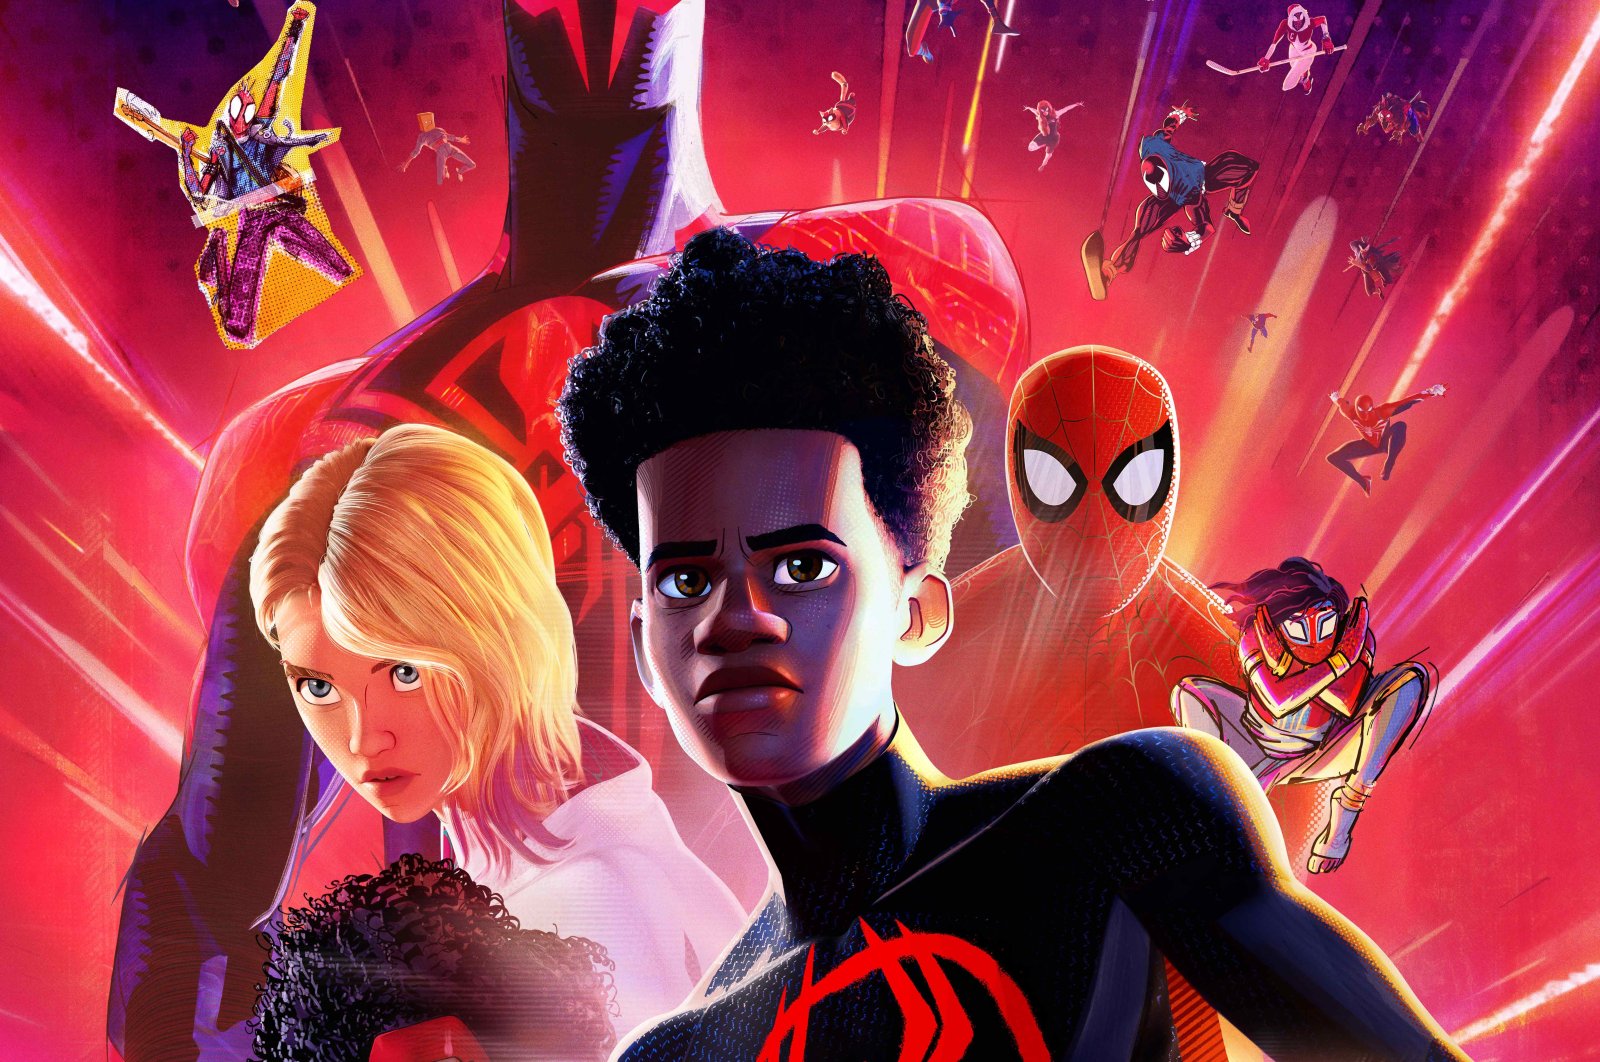 Spider-Man: Spider-Verse – Spider-Society / Characters - TV Tropes